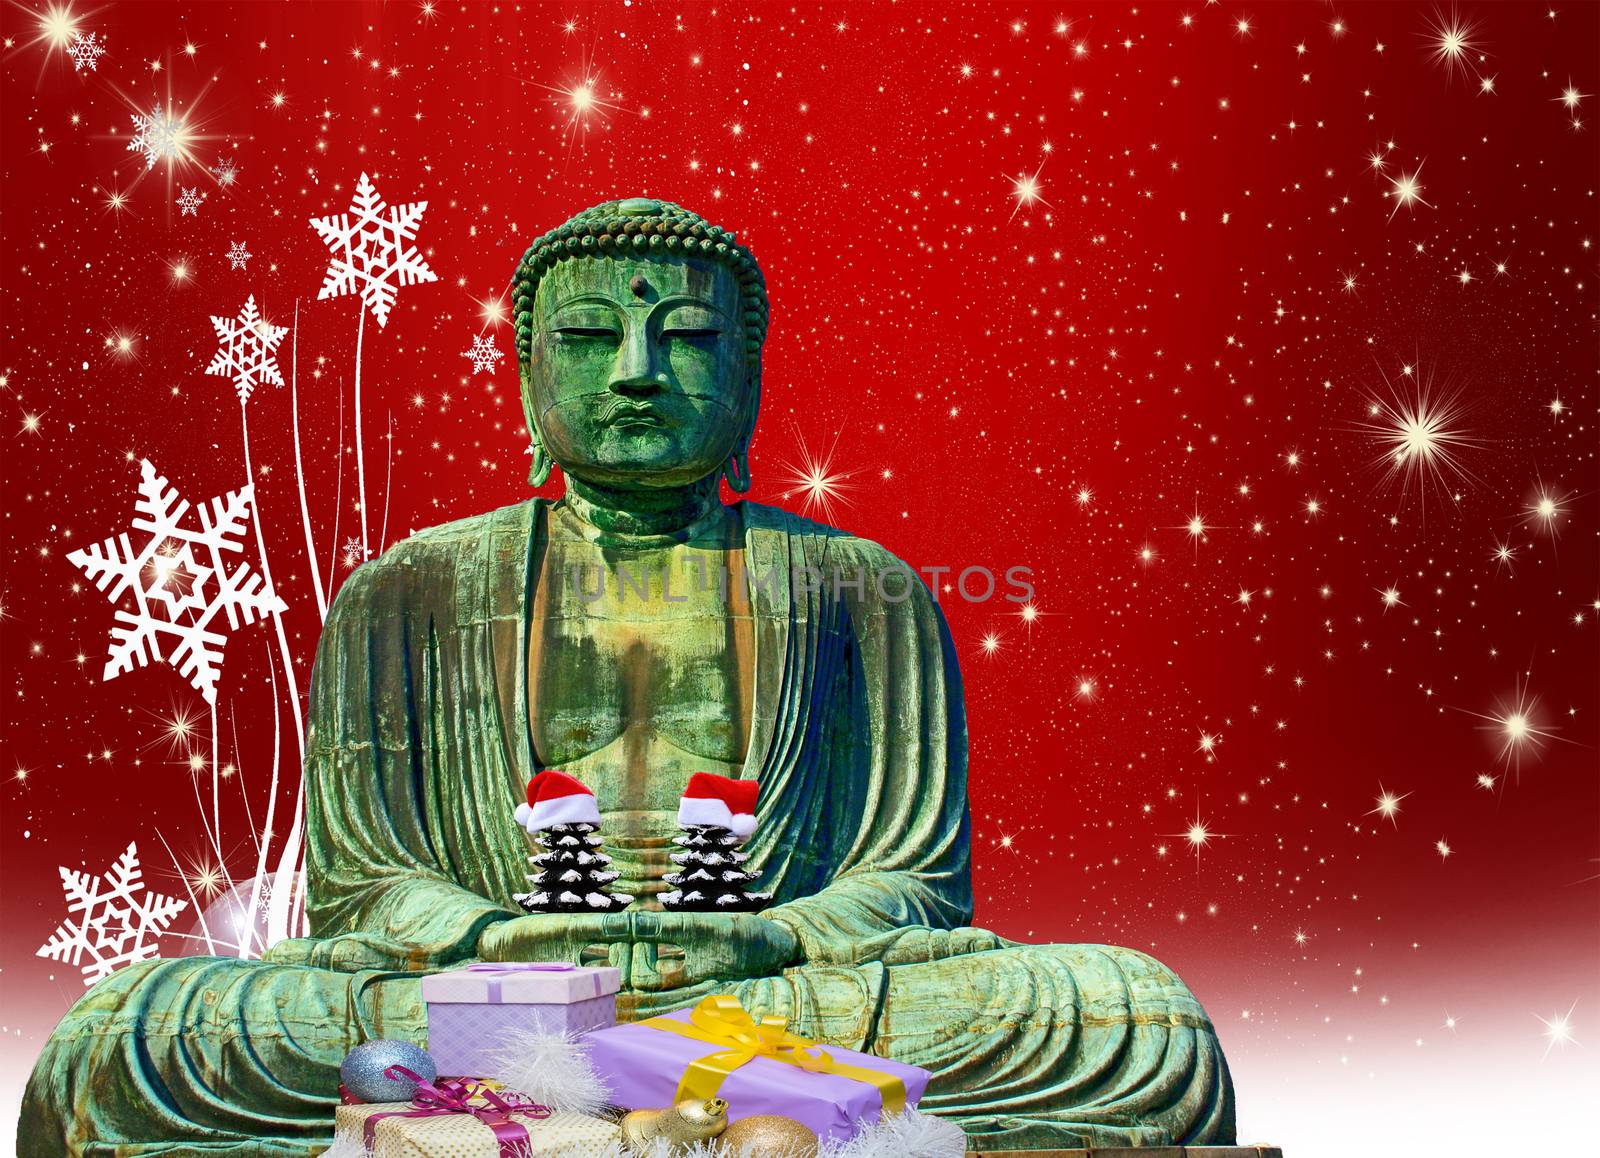 christmas card buddha monk statue with presents holding 2 small christmas trees with hats and a red christmas background with stars by charlottebleijenberg